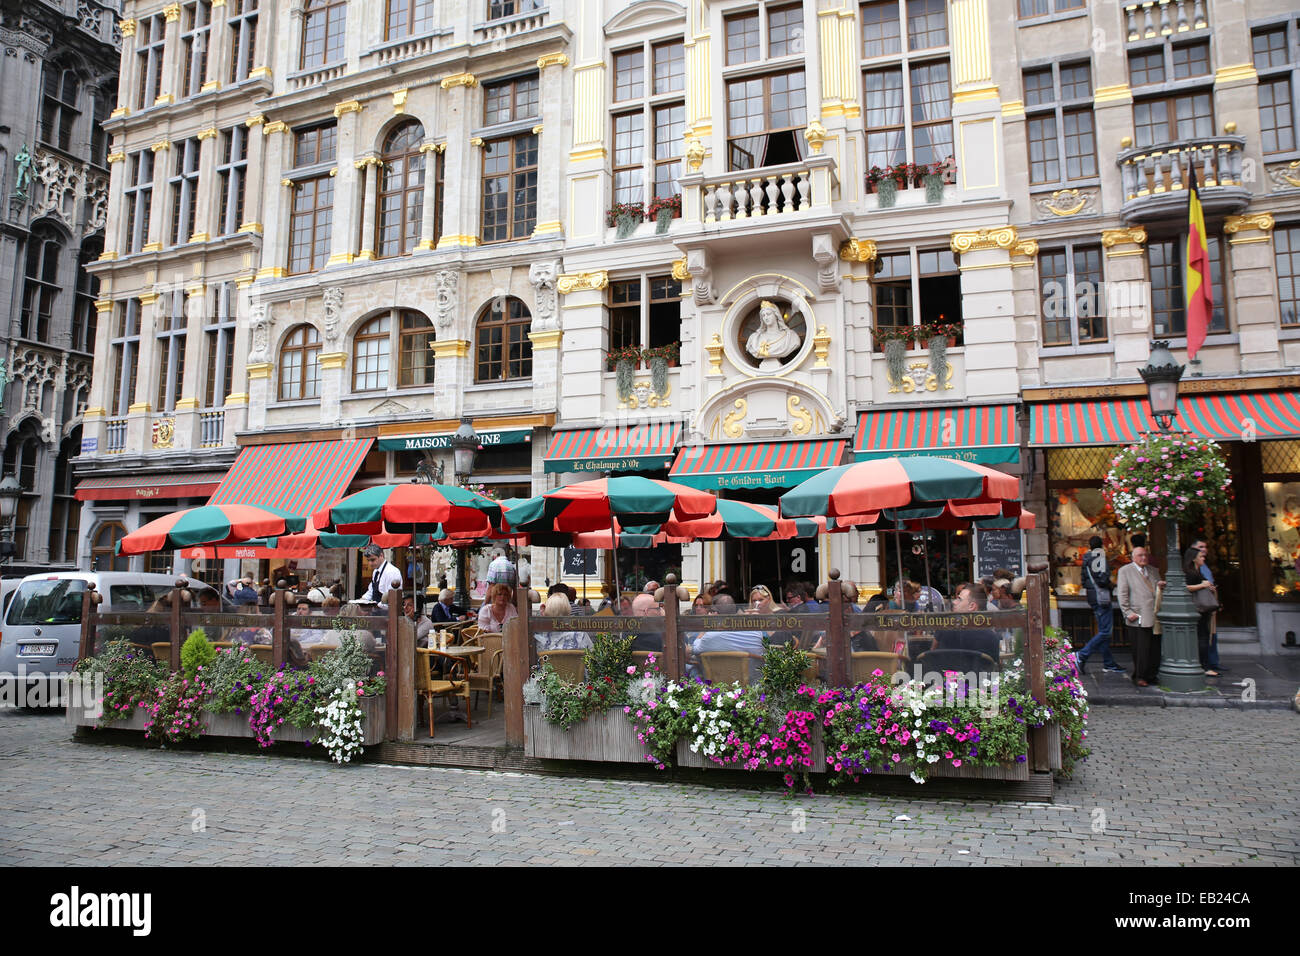 brussels grand place restaurant La Chaloupe d’or Stock Photo